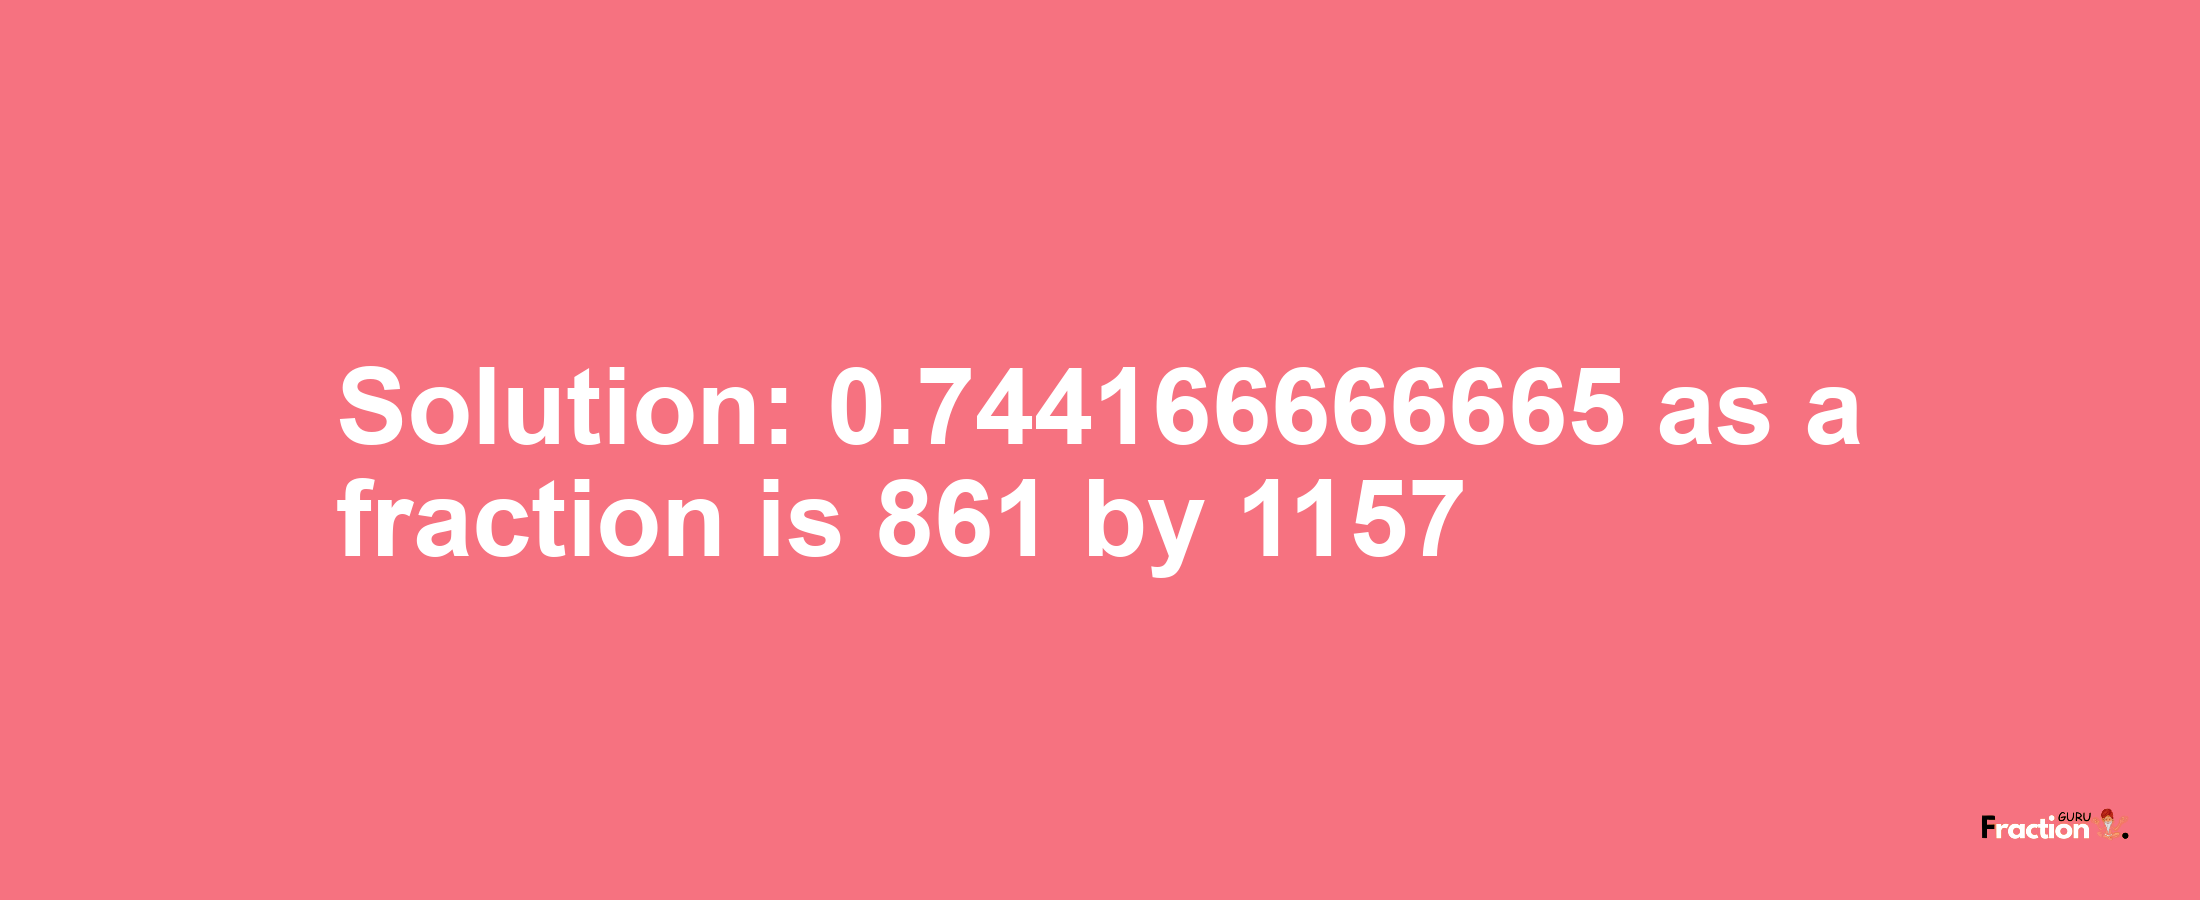 Solution:0.744166666665 as a fraction is 861/1157